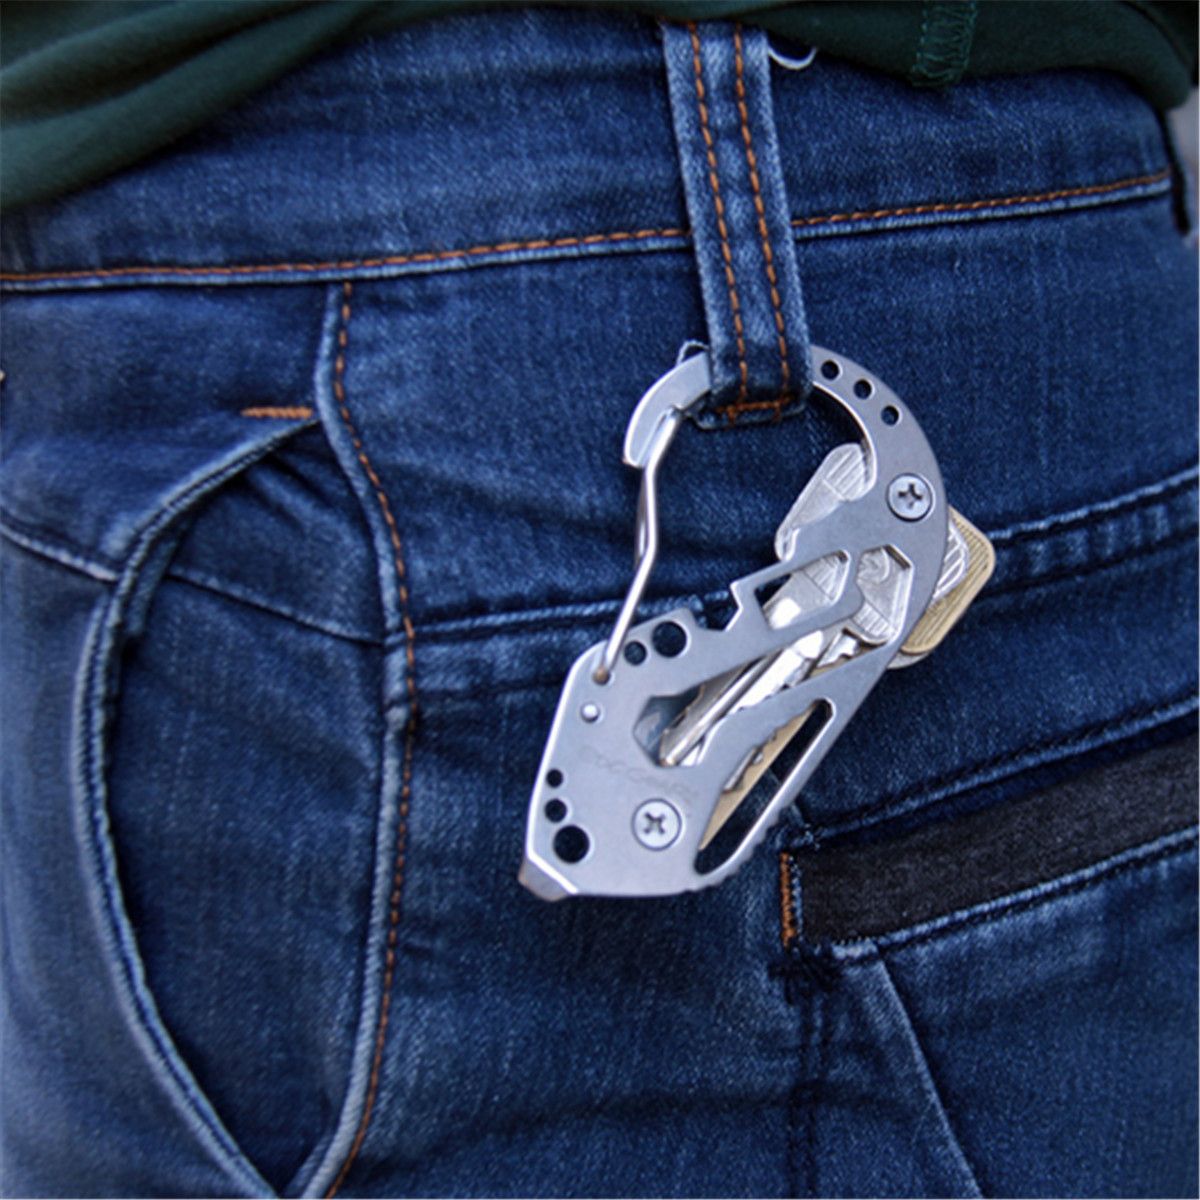 Multifunction-Stainless-Steel-Portable-Key-Chain-Holder-Carabiner-Wrench-EDC-Outdoor-Tool-1022461